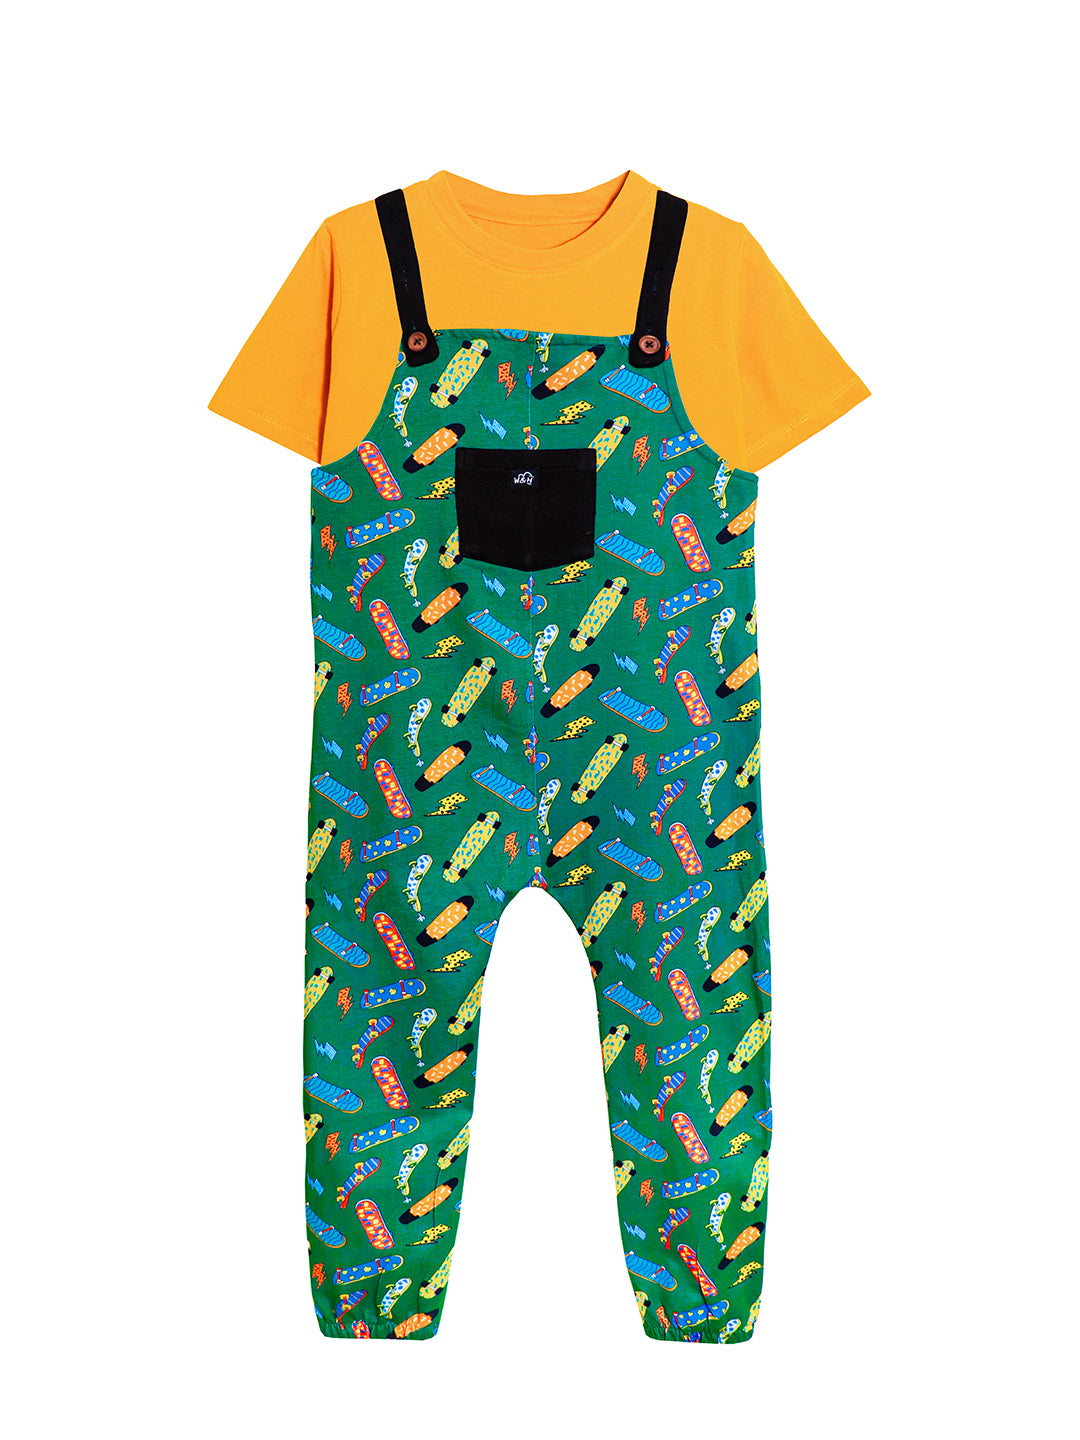 Skateboard Cotton Dungaree with Yellow T-shirt for Boys & Girls